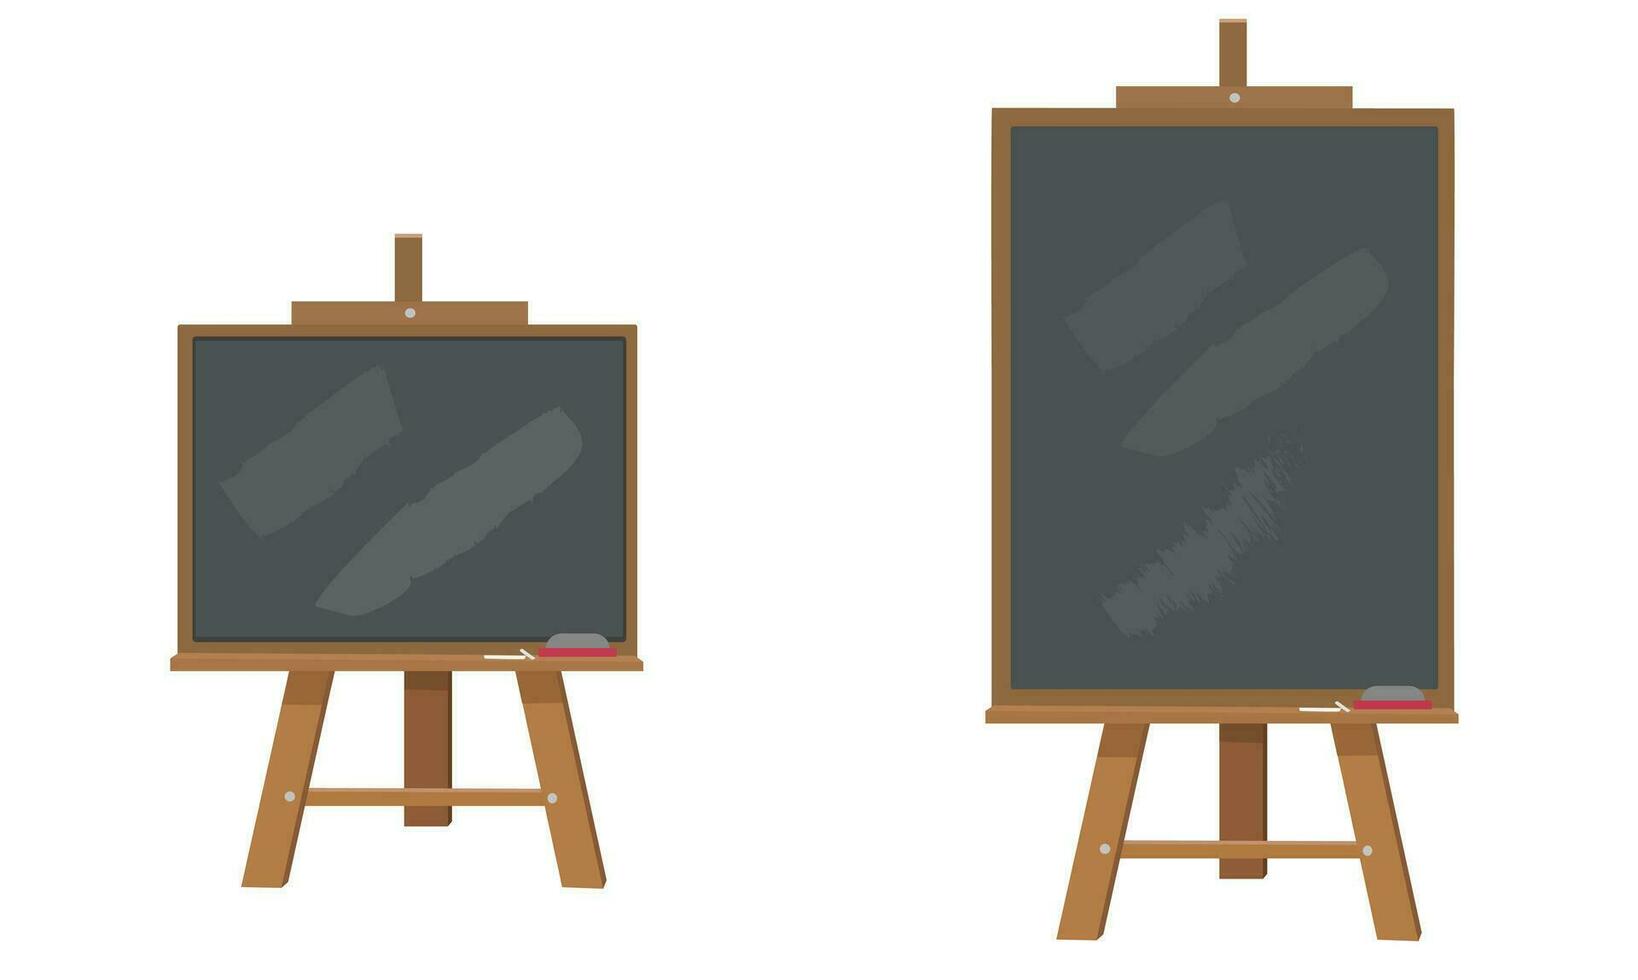 Chalkboard or blackboard with wooden easel stand vector illustration set.  Black board used in classroom or restaurant, cafe house. Back to school concept.